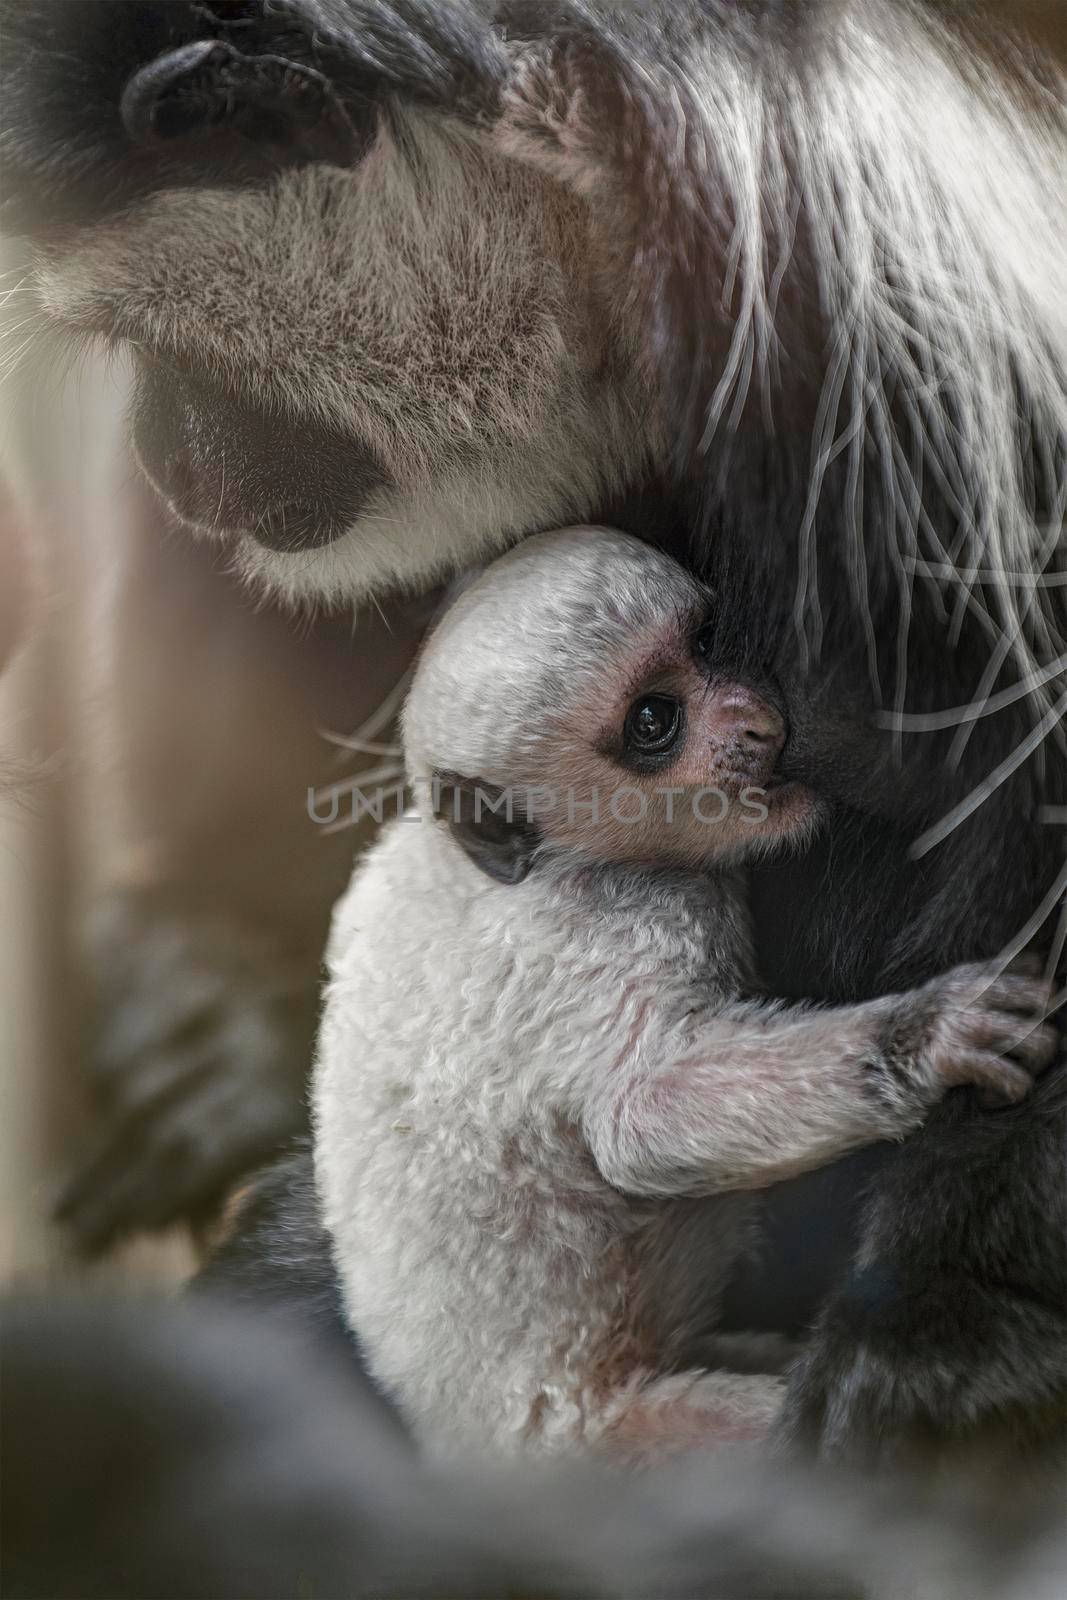 A baby Abyssinian colobus drinks its mother's breast milk in the evening sunlight. Newborn Abyssinian colobus. Black monkeys with long white tails.